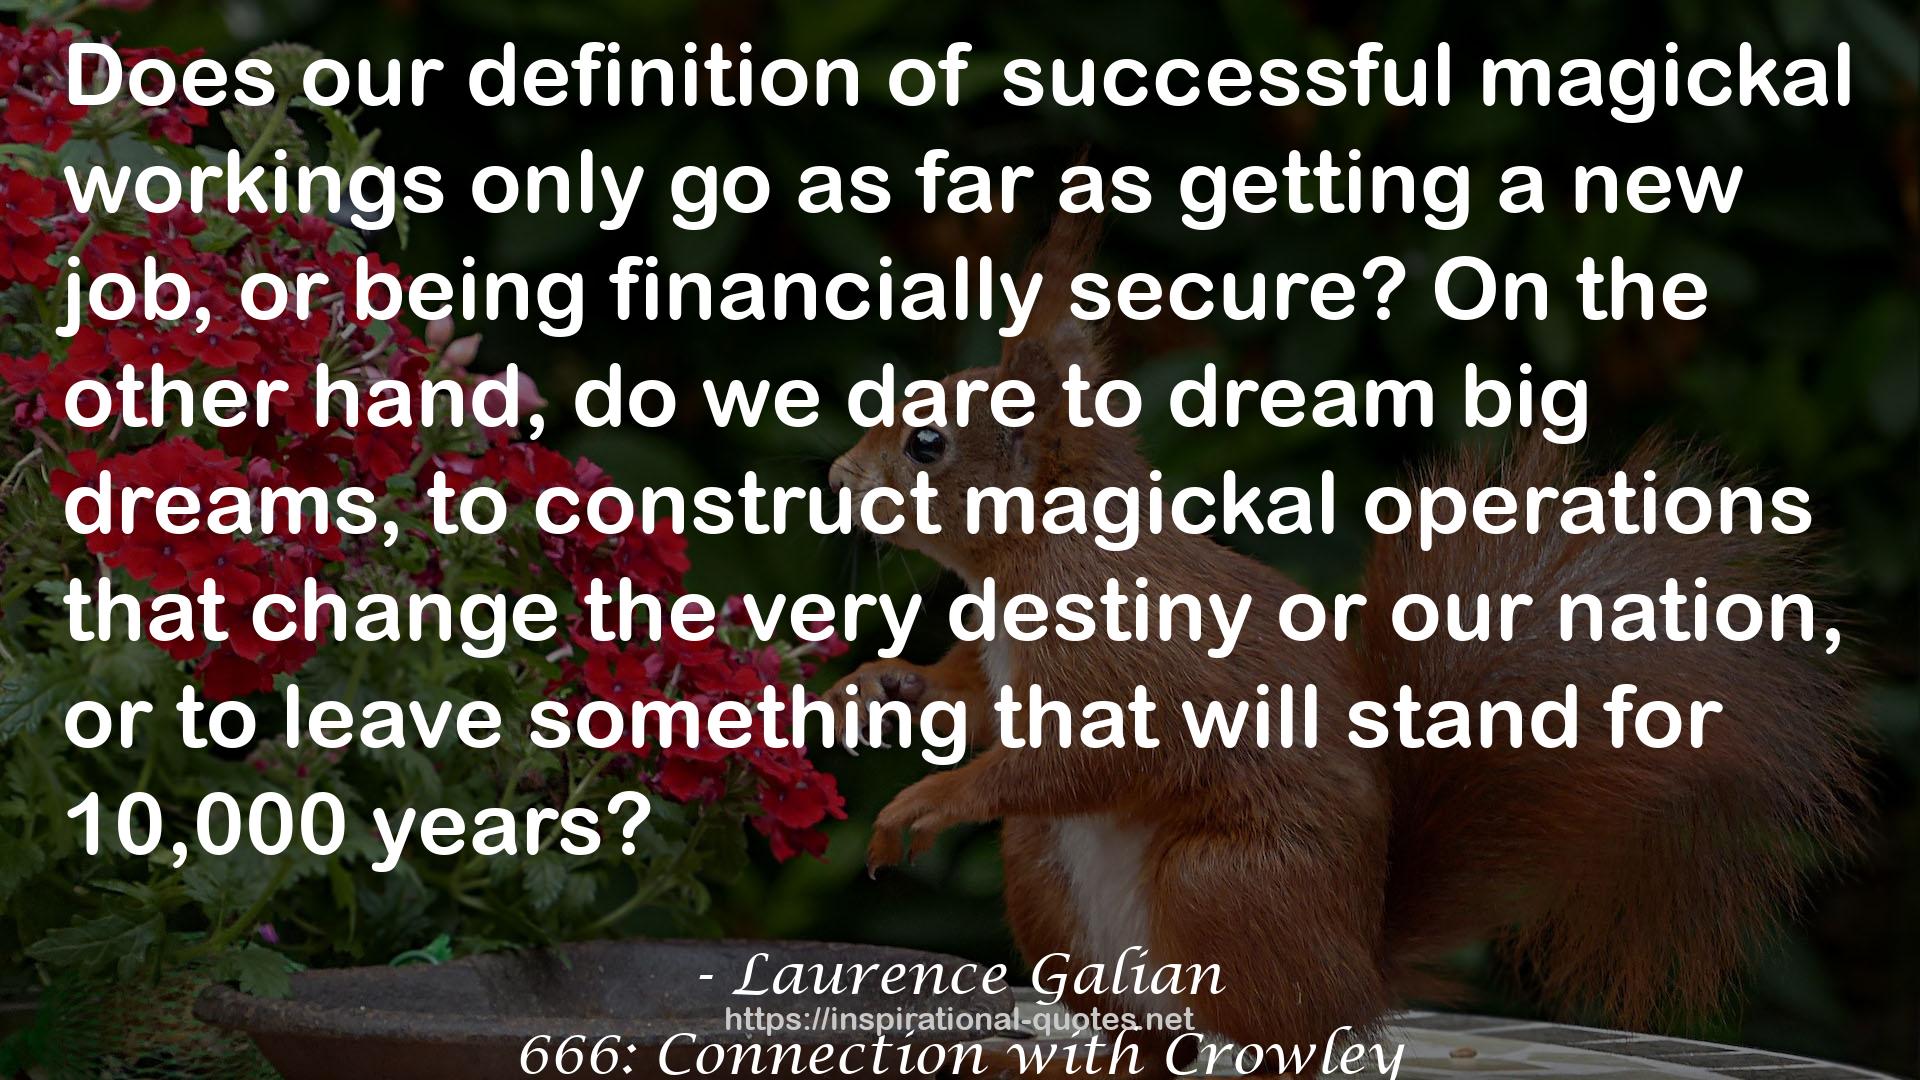 Laurence Galian QUOTES